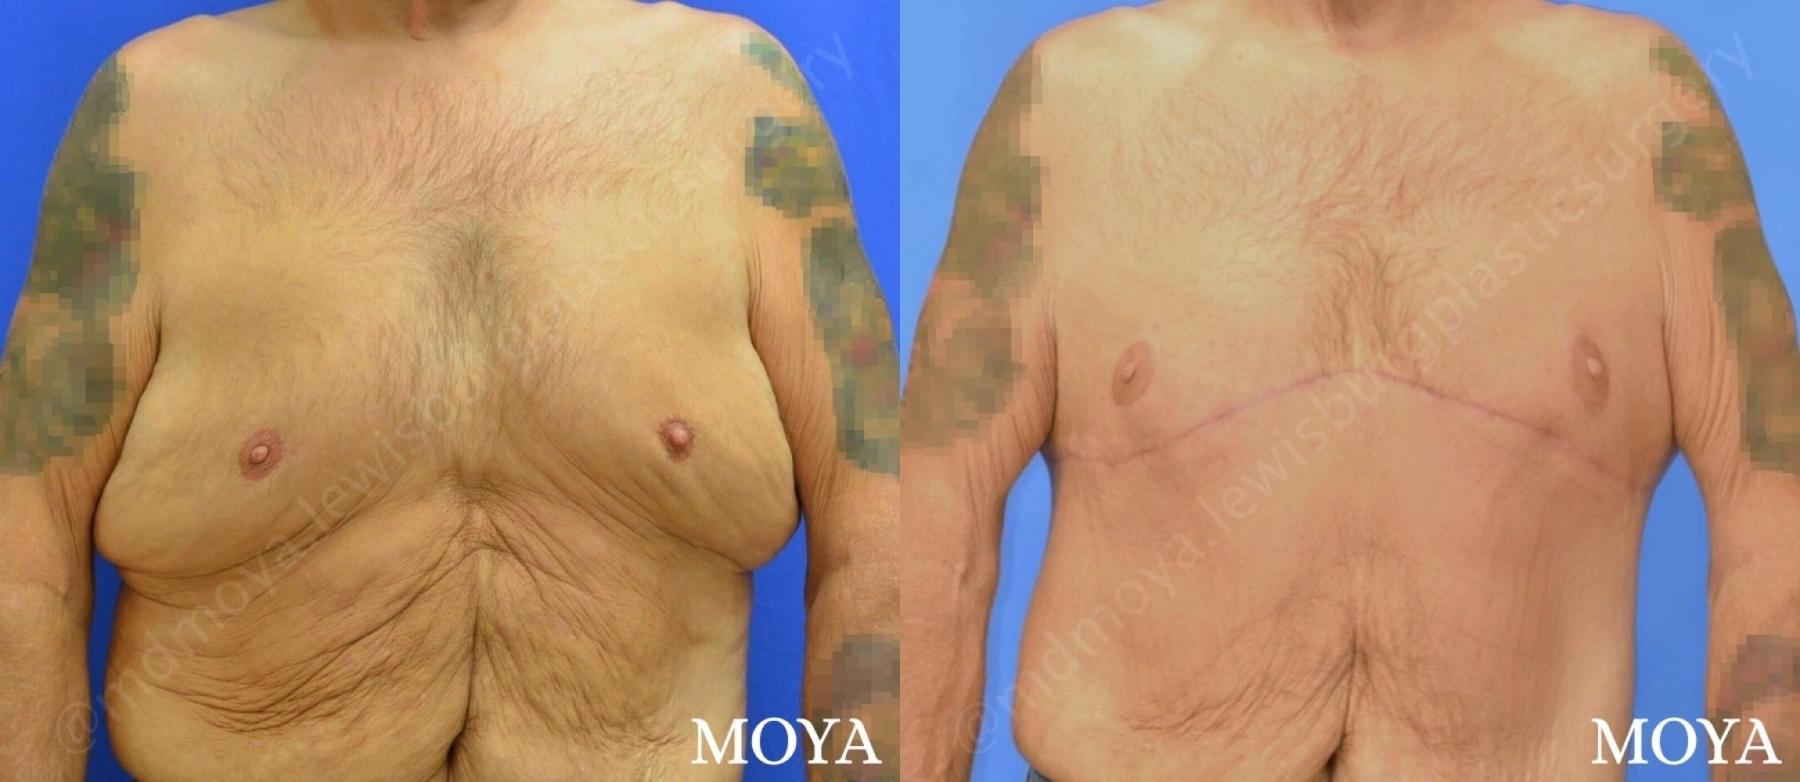 Male Upper Body Lift: Patient 1 - Before and After  